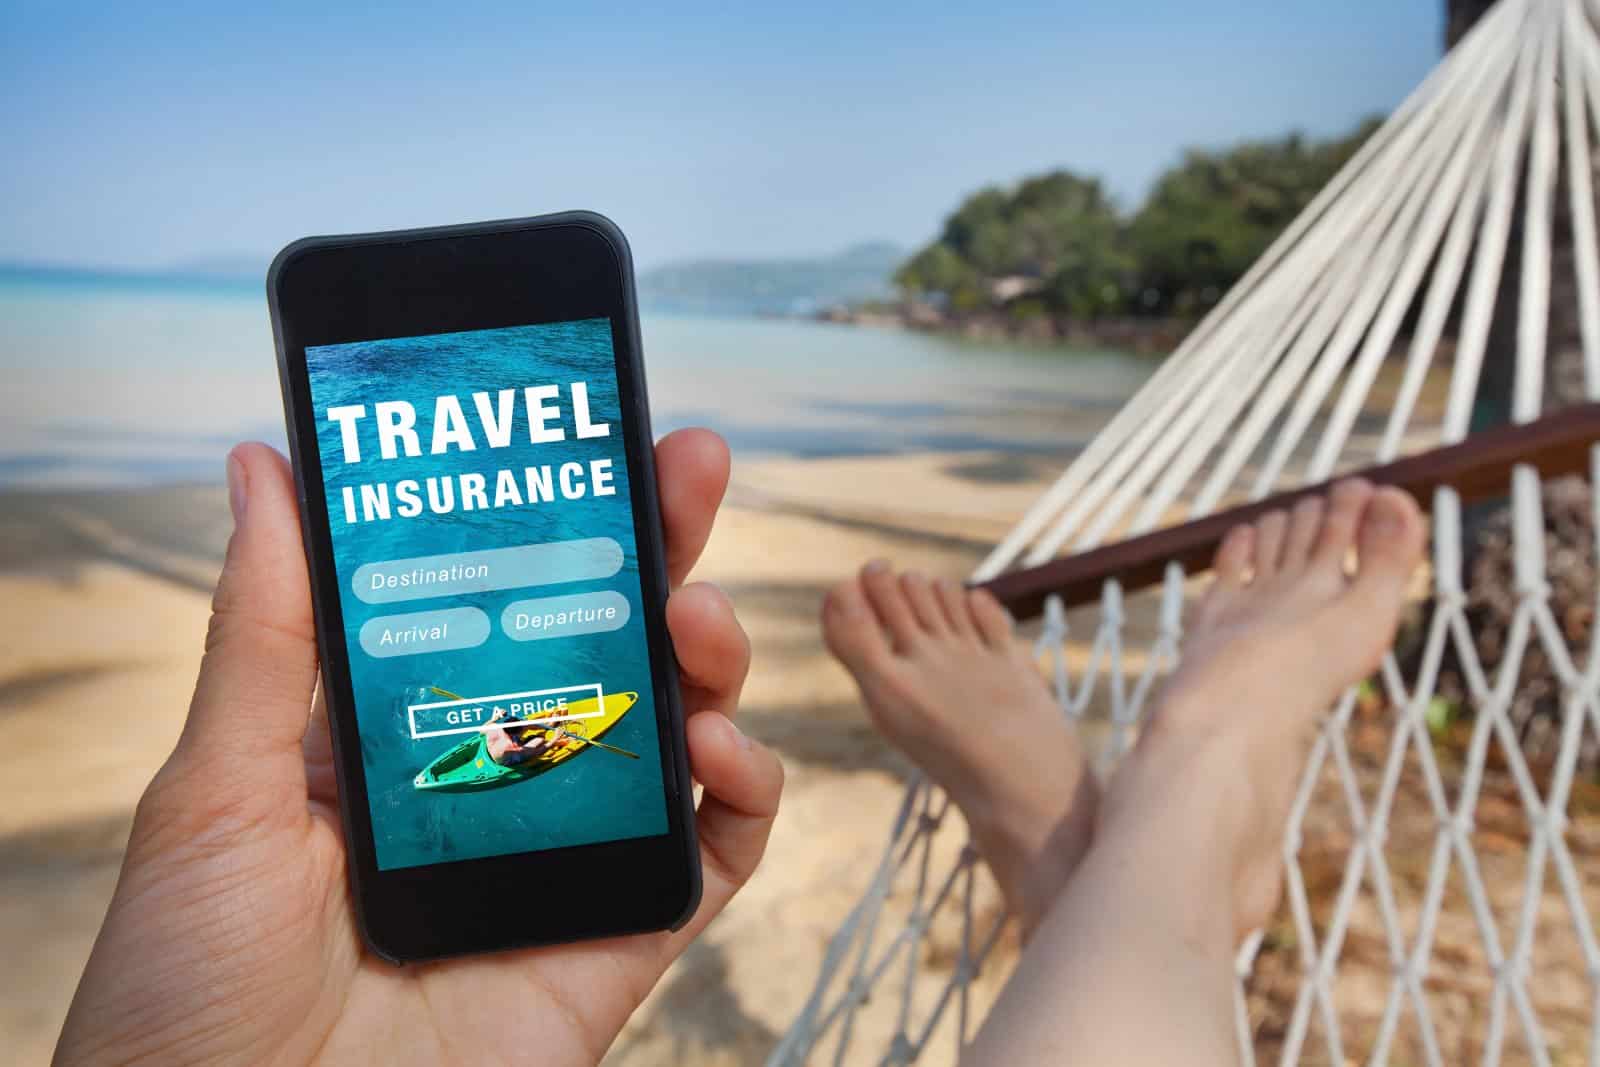 <p>Don’t skip on travel insurance, but shop around for the best deal. It’s the parachute you hope to never use, but you’ll be glad to have if needed.</p>